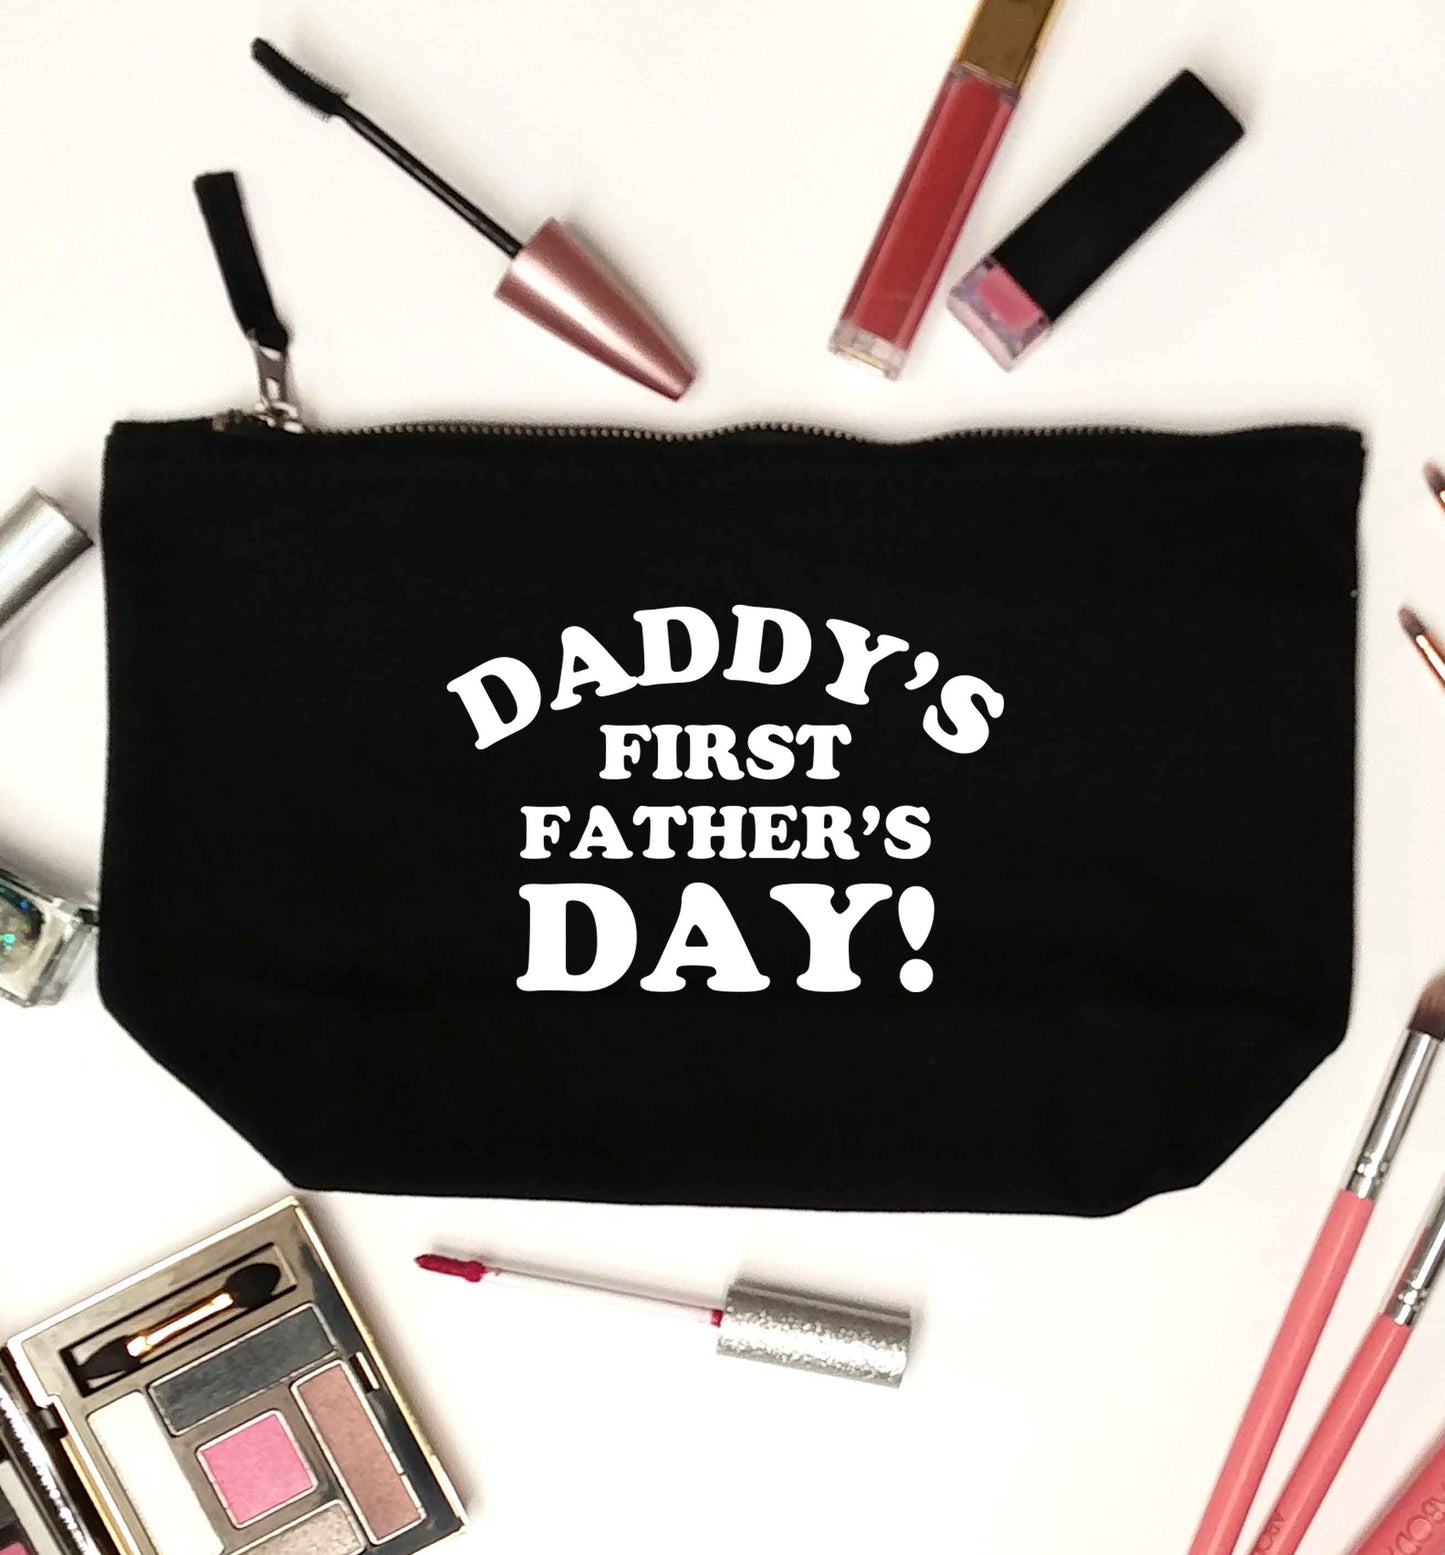 Daddy's first father's day black makeup bag